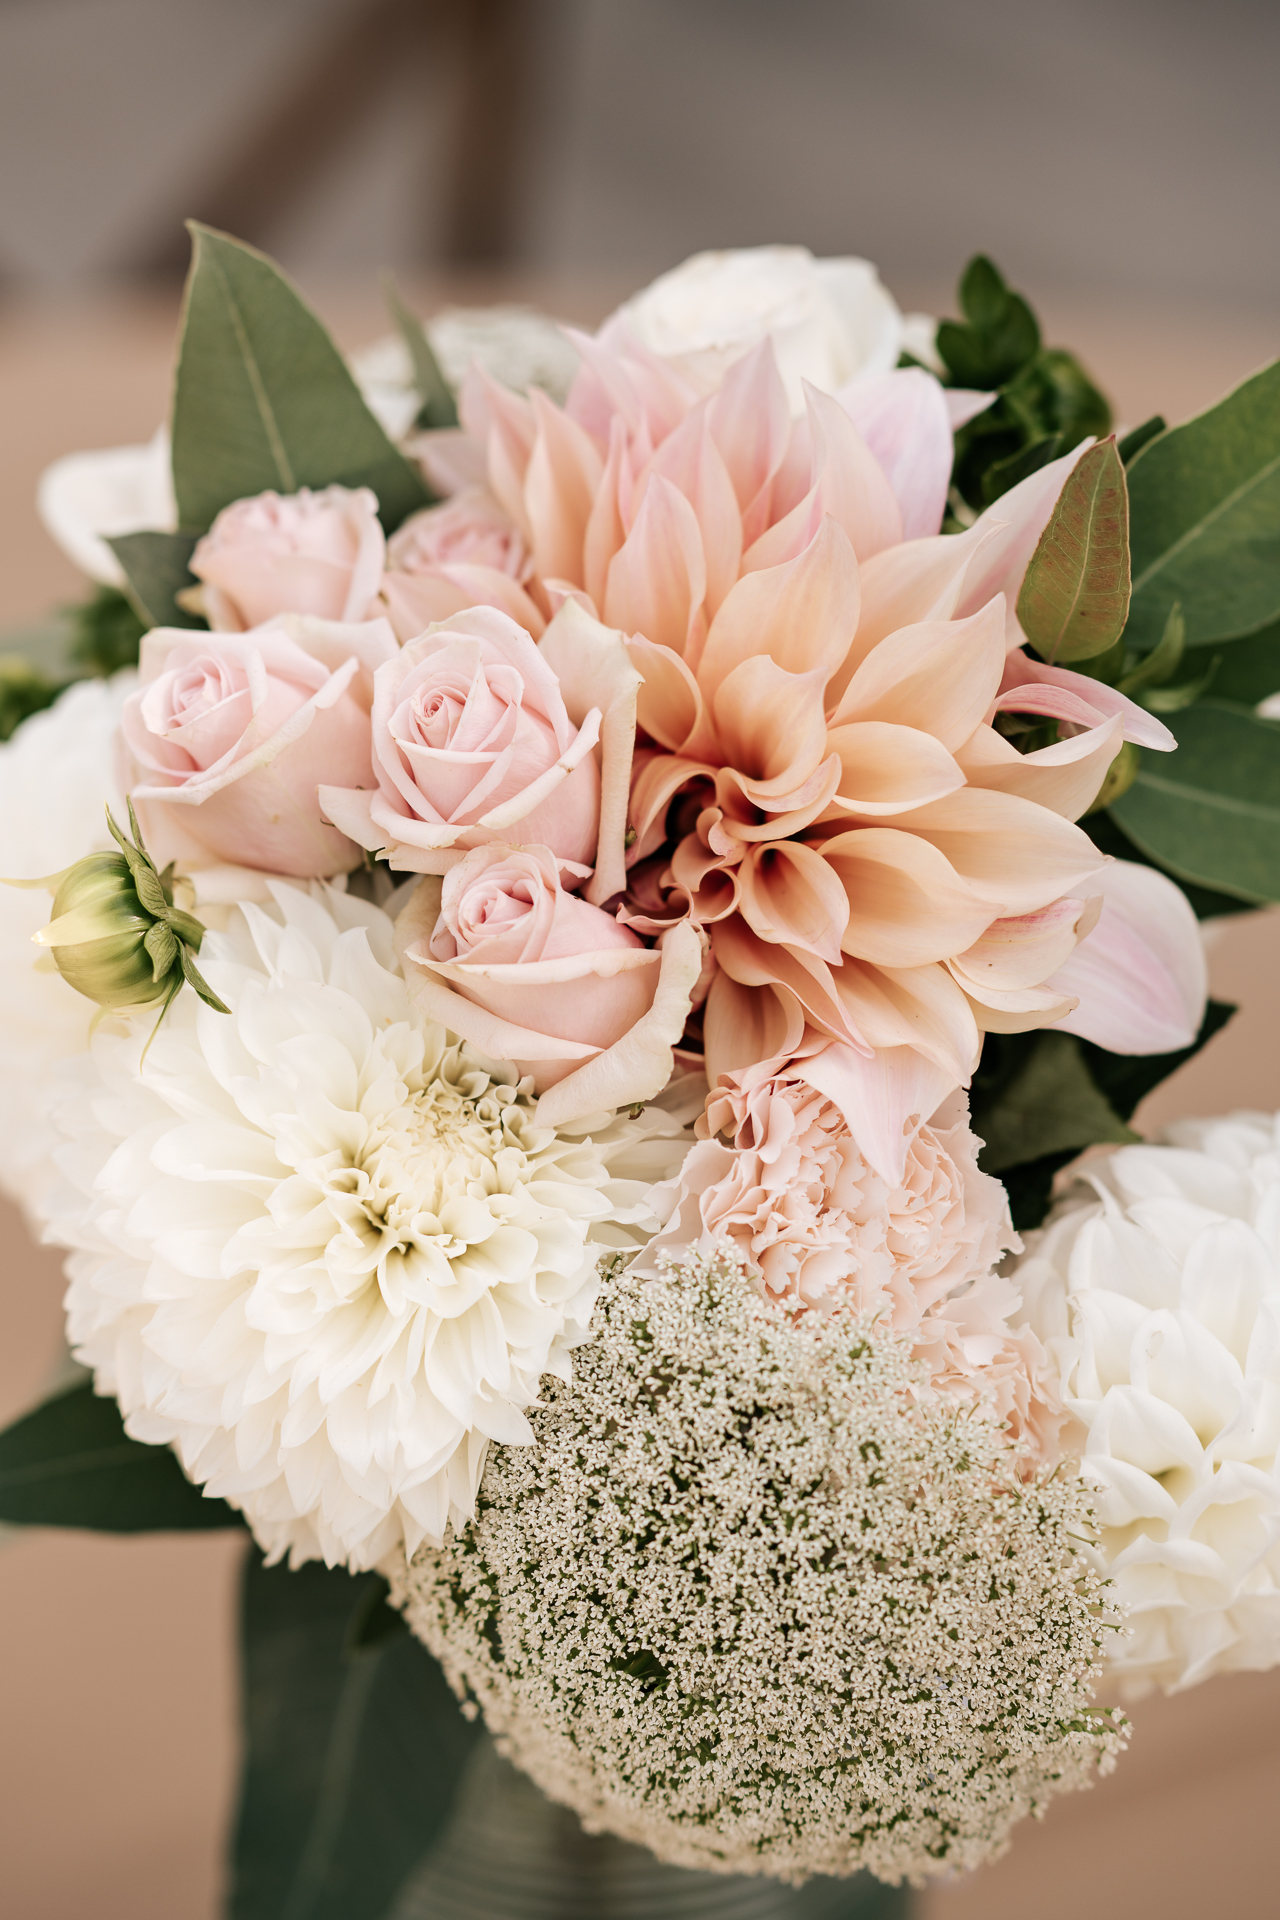 Wedding floral arrangement with pink and white flowers